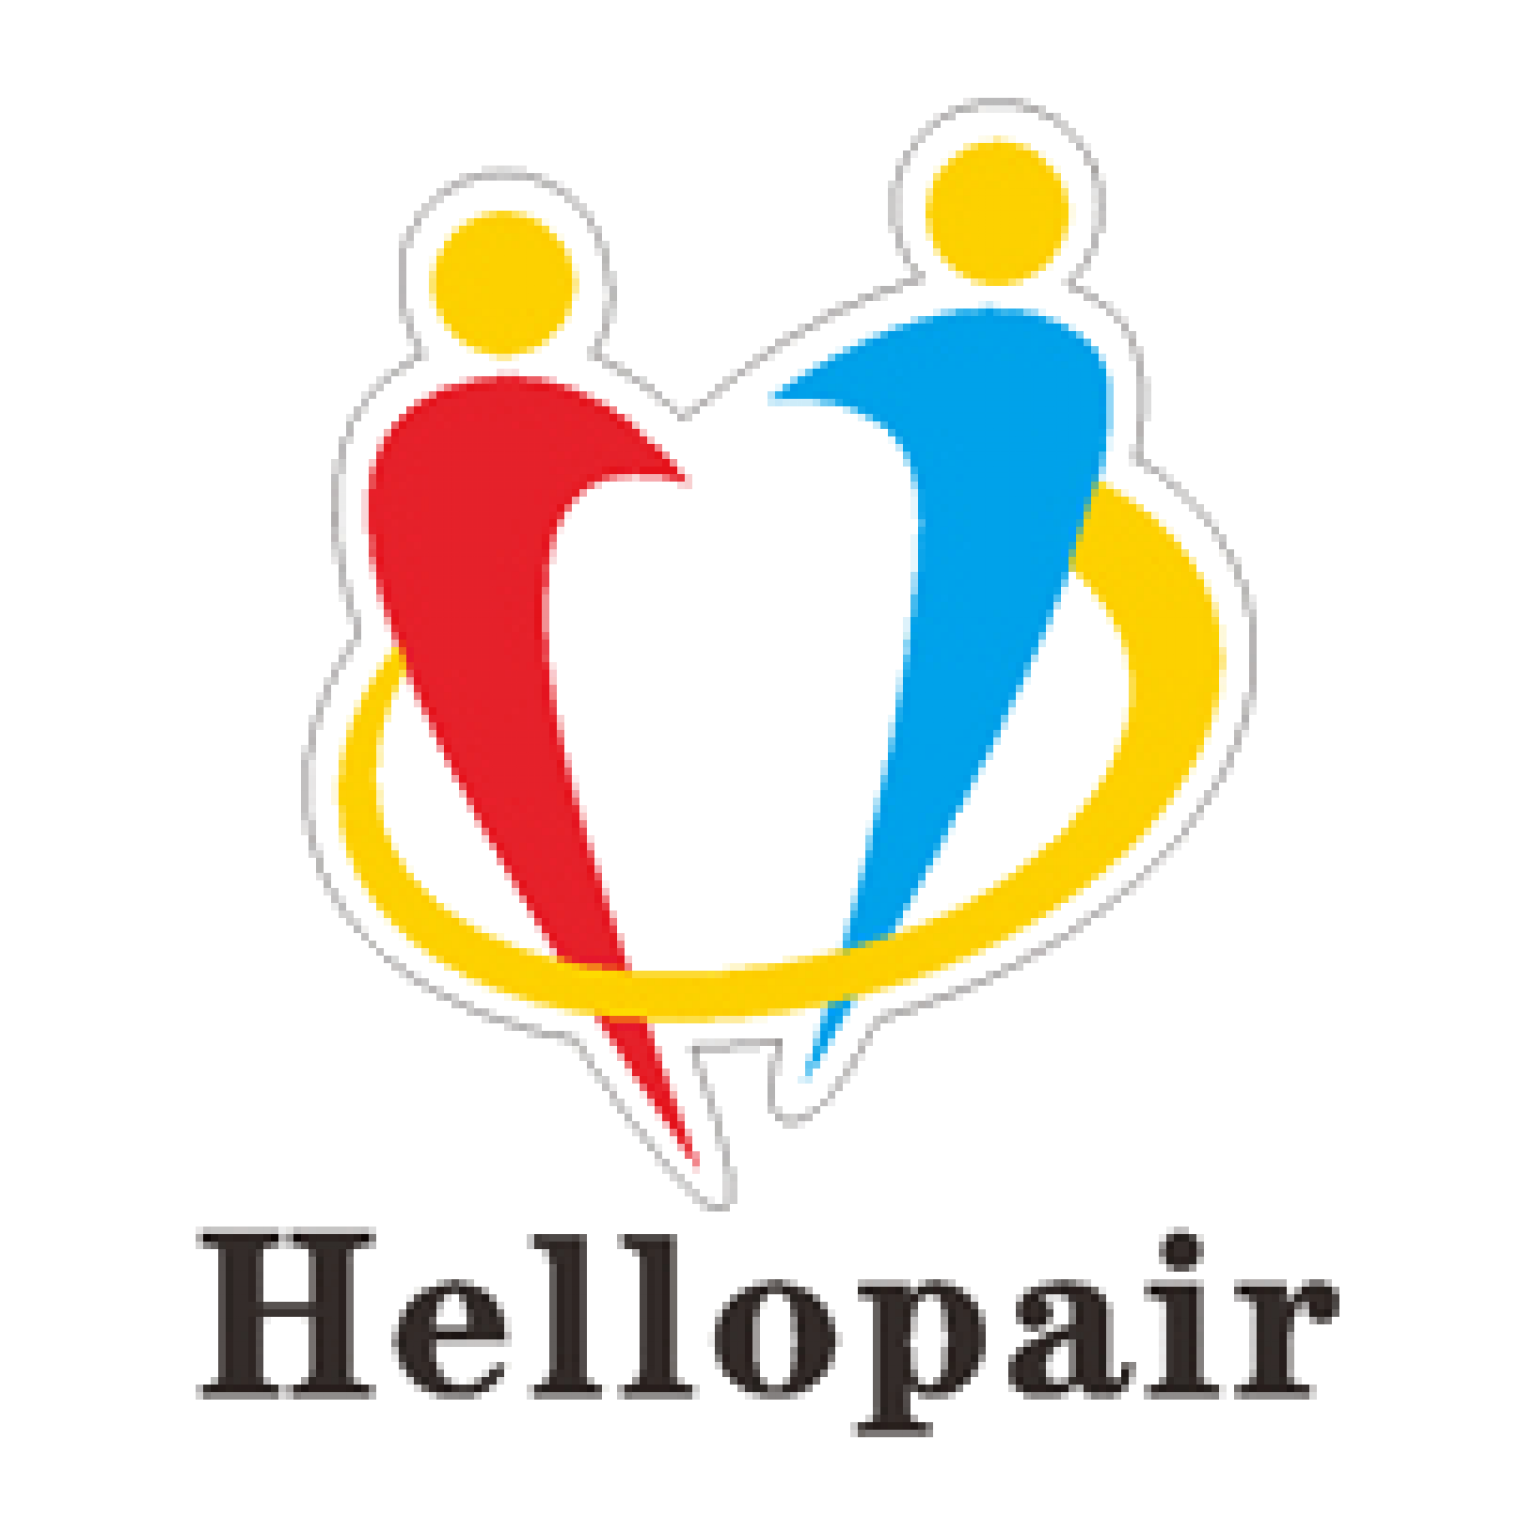 Welcome to our new affiliate member Hellopair  from China